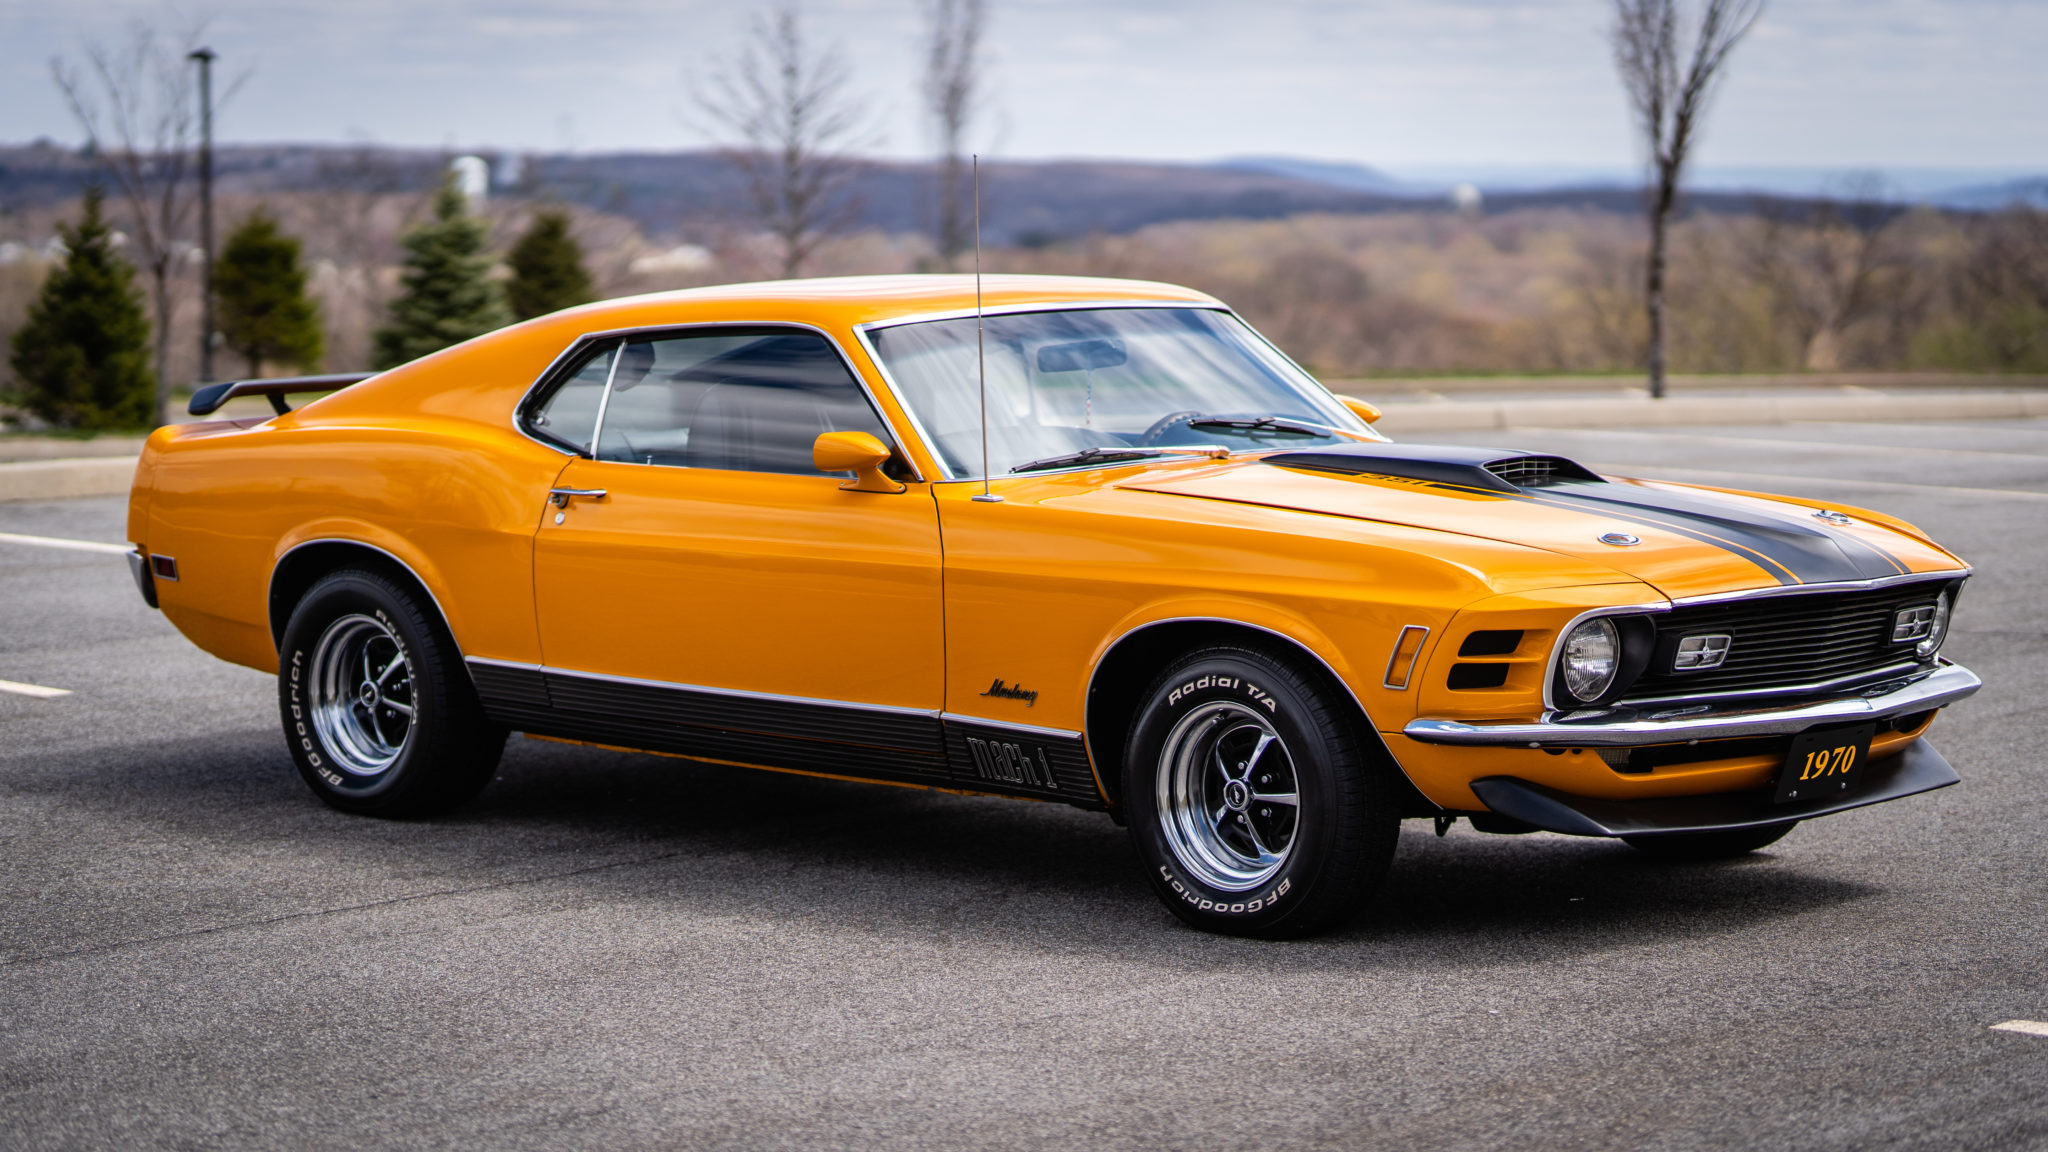 1970 Ford Mustang Mach 1 makes timely auction debut | Autoblog